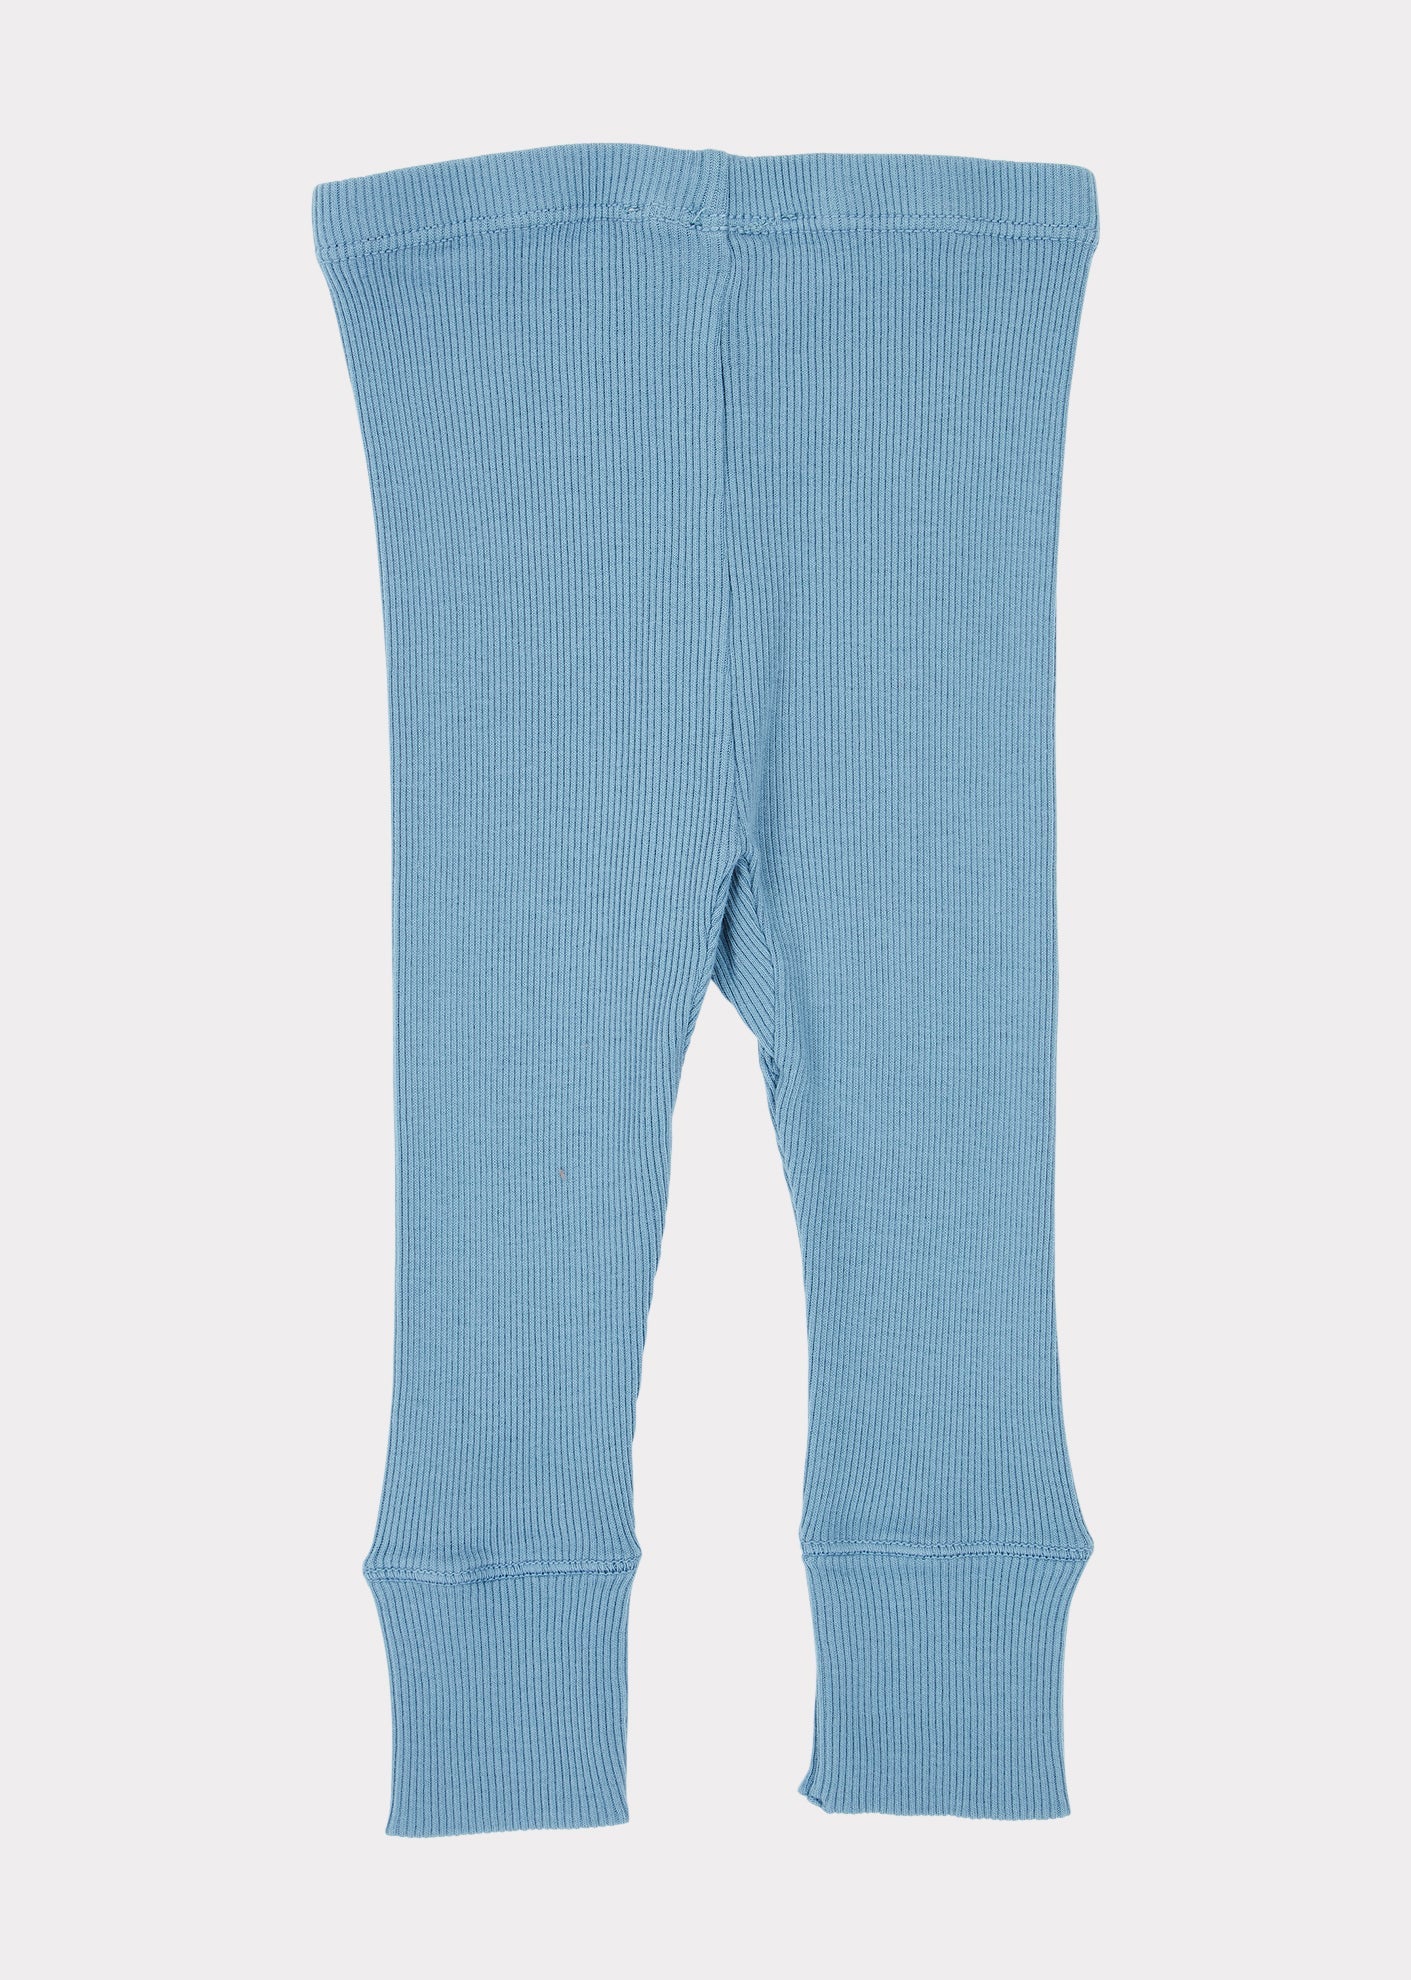 CHAFFINCH BABY TROUSERS - BLUE